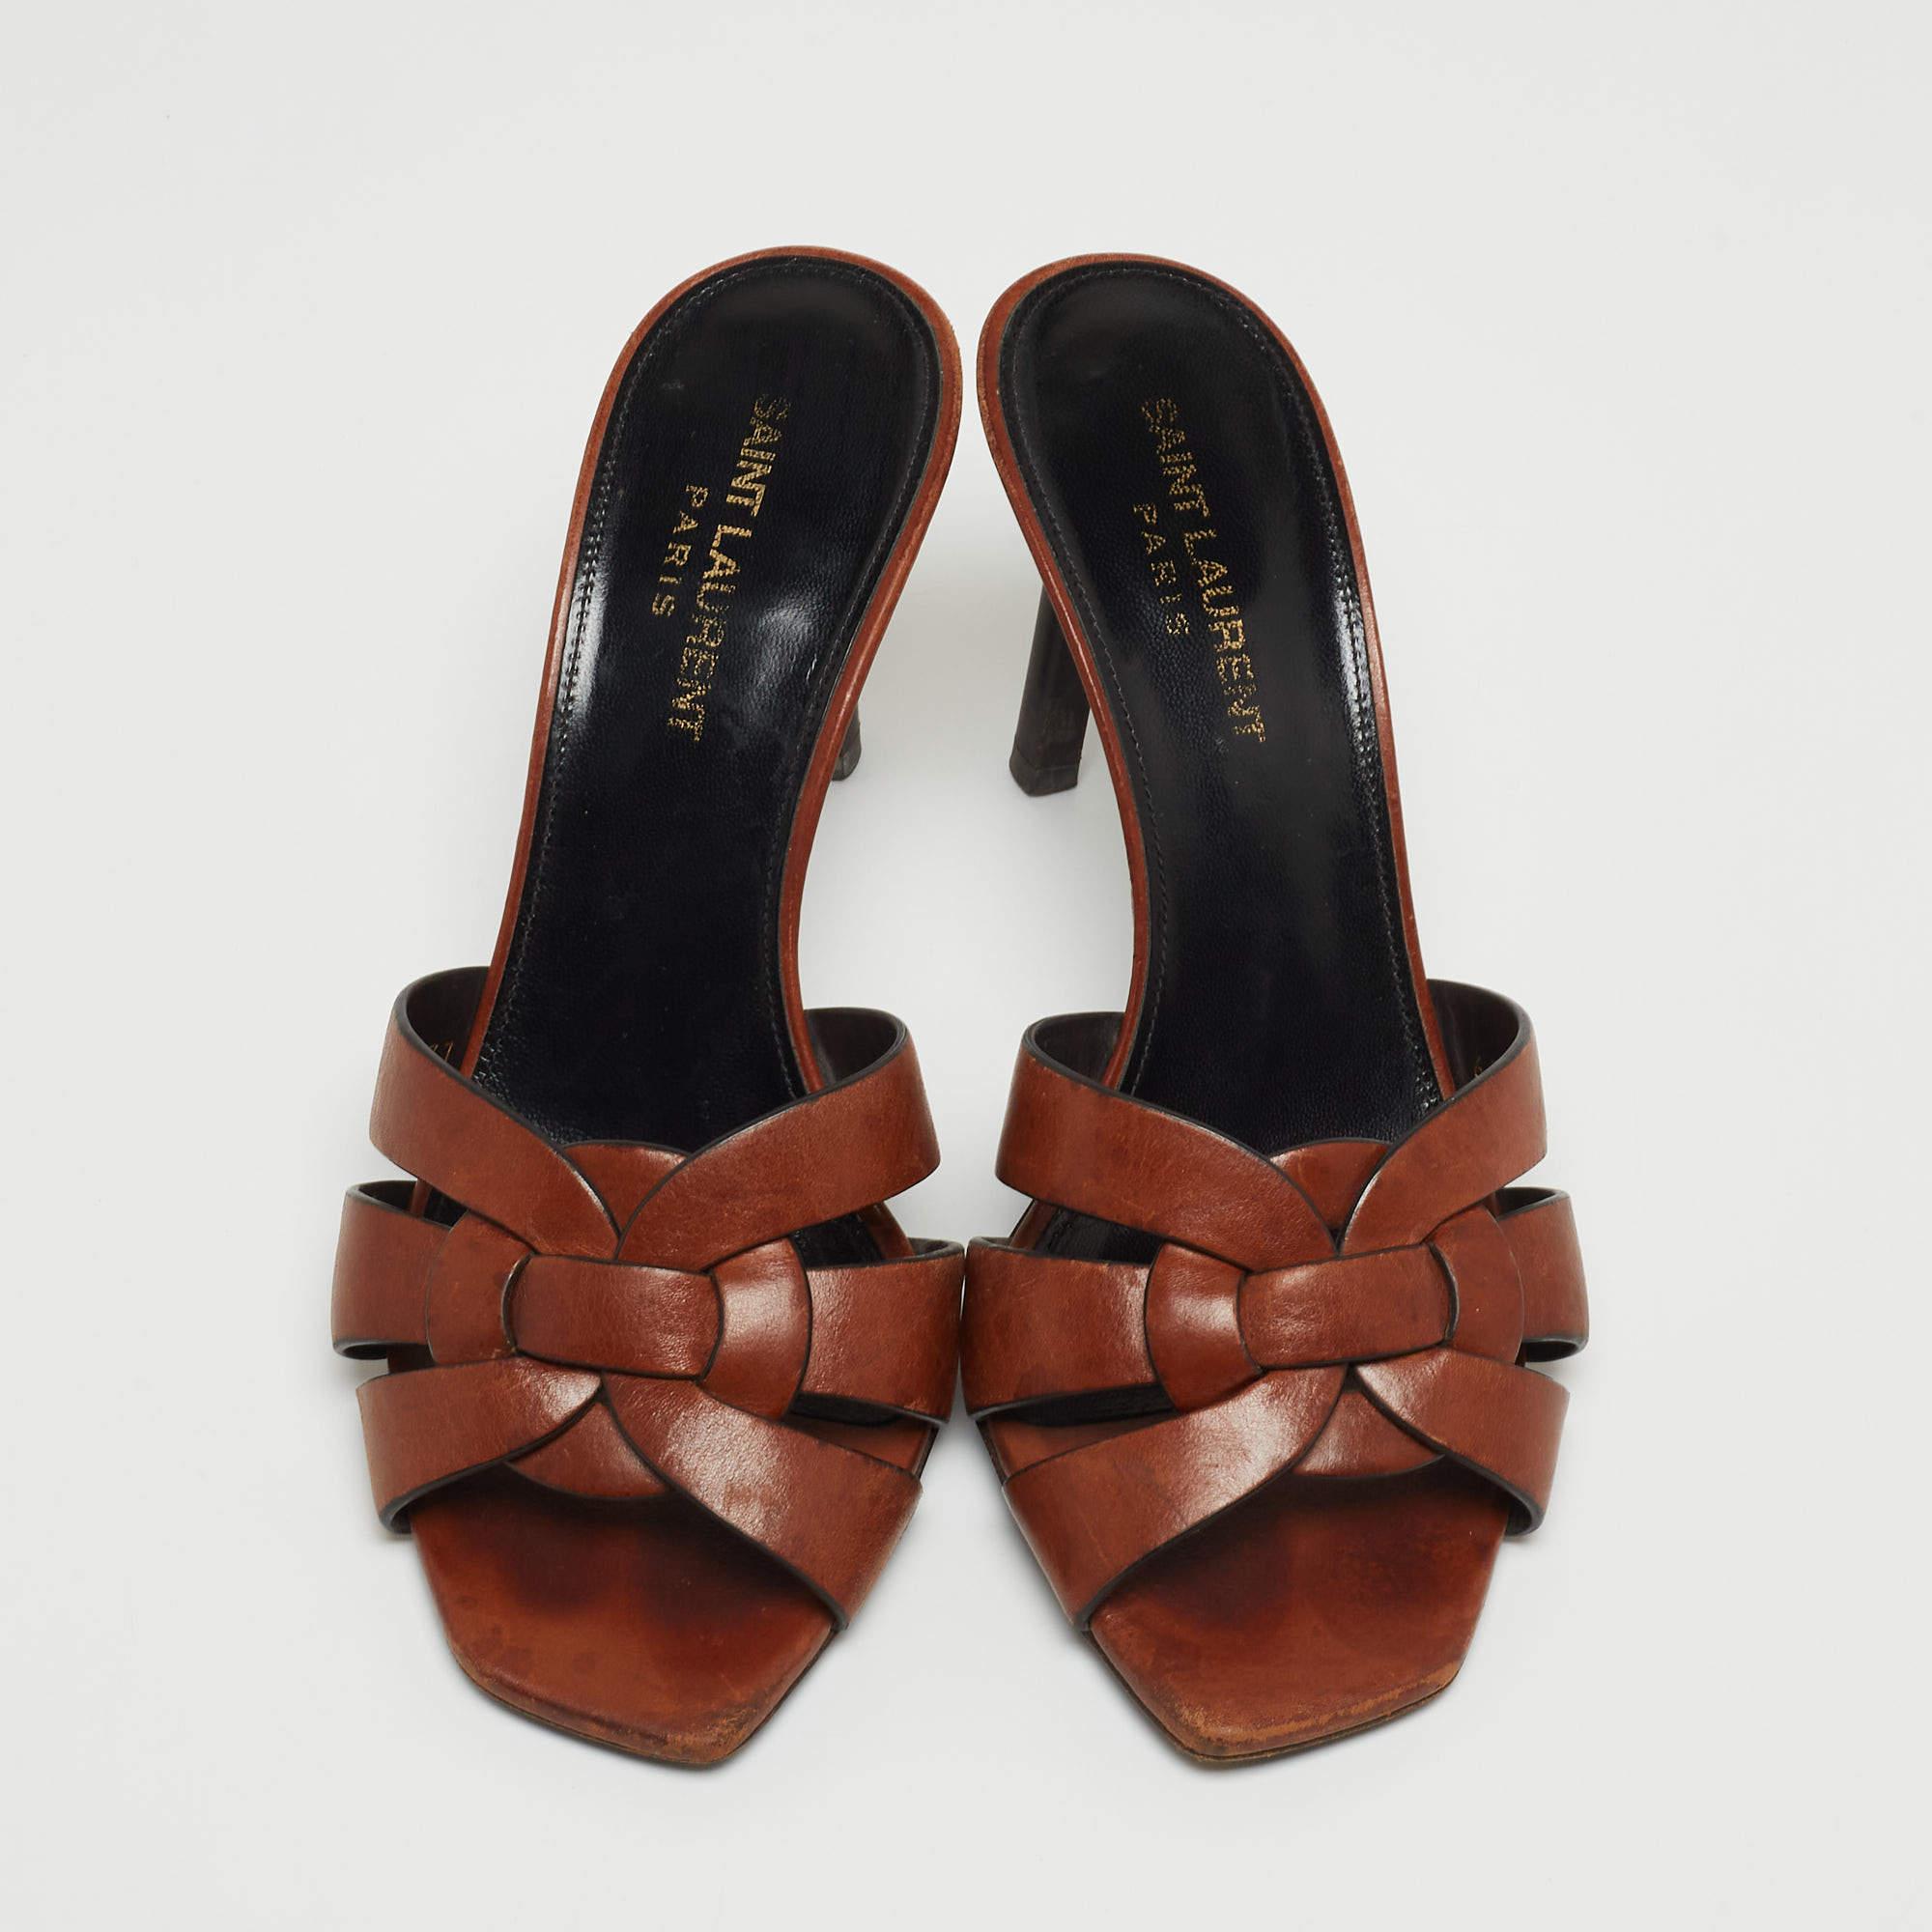 One of the most sought-after designs from Saint Laurent is their Tribute sandals. They are such a craze amongst fashionistas around the world, and it is time you own one yourself. These beauties are ideal for your spring-summer closet and are